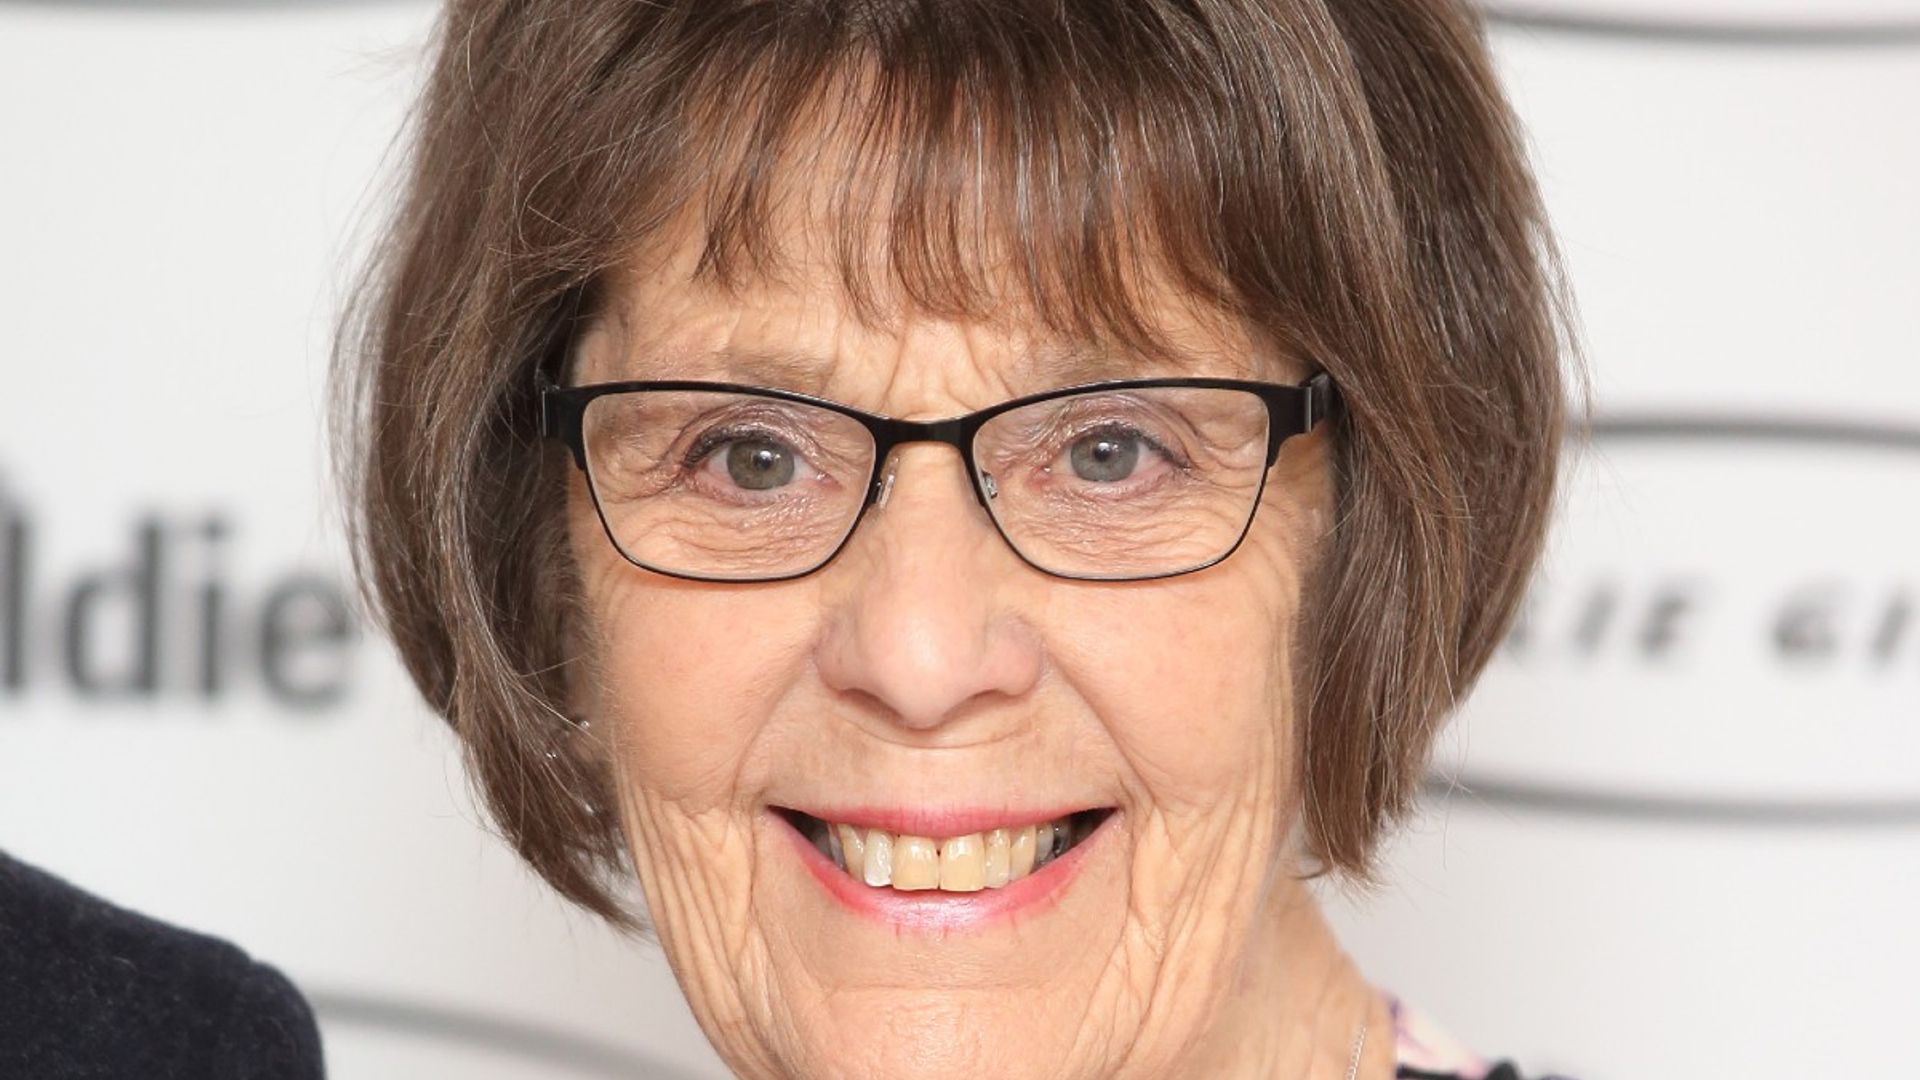 Gogglebox star June Bernicoff dies aged 82 after short illness, her family confirms